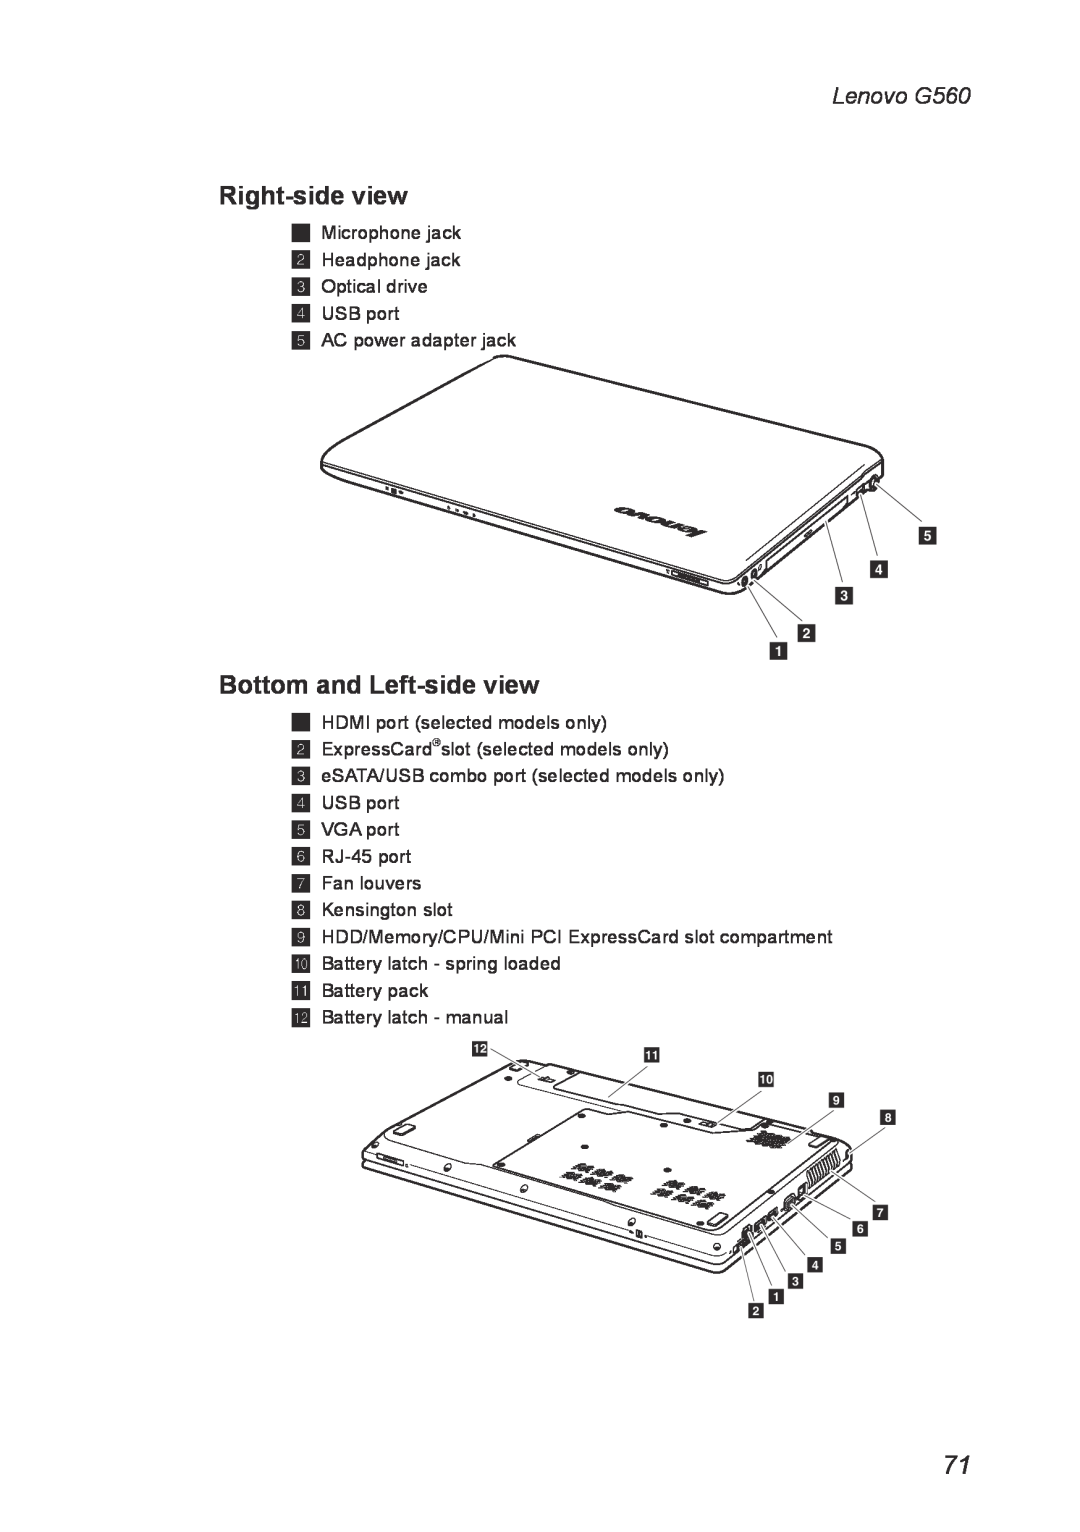 Lenovo manual Right-side view, Bottom and Left-side view, Lenovo G560 